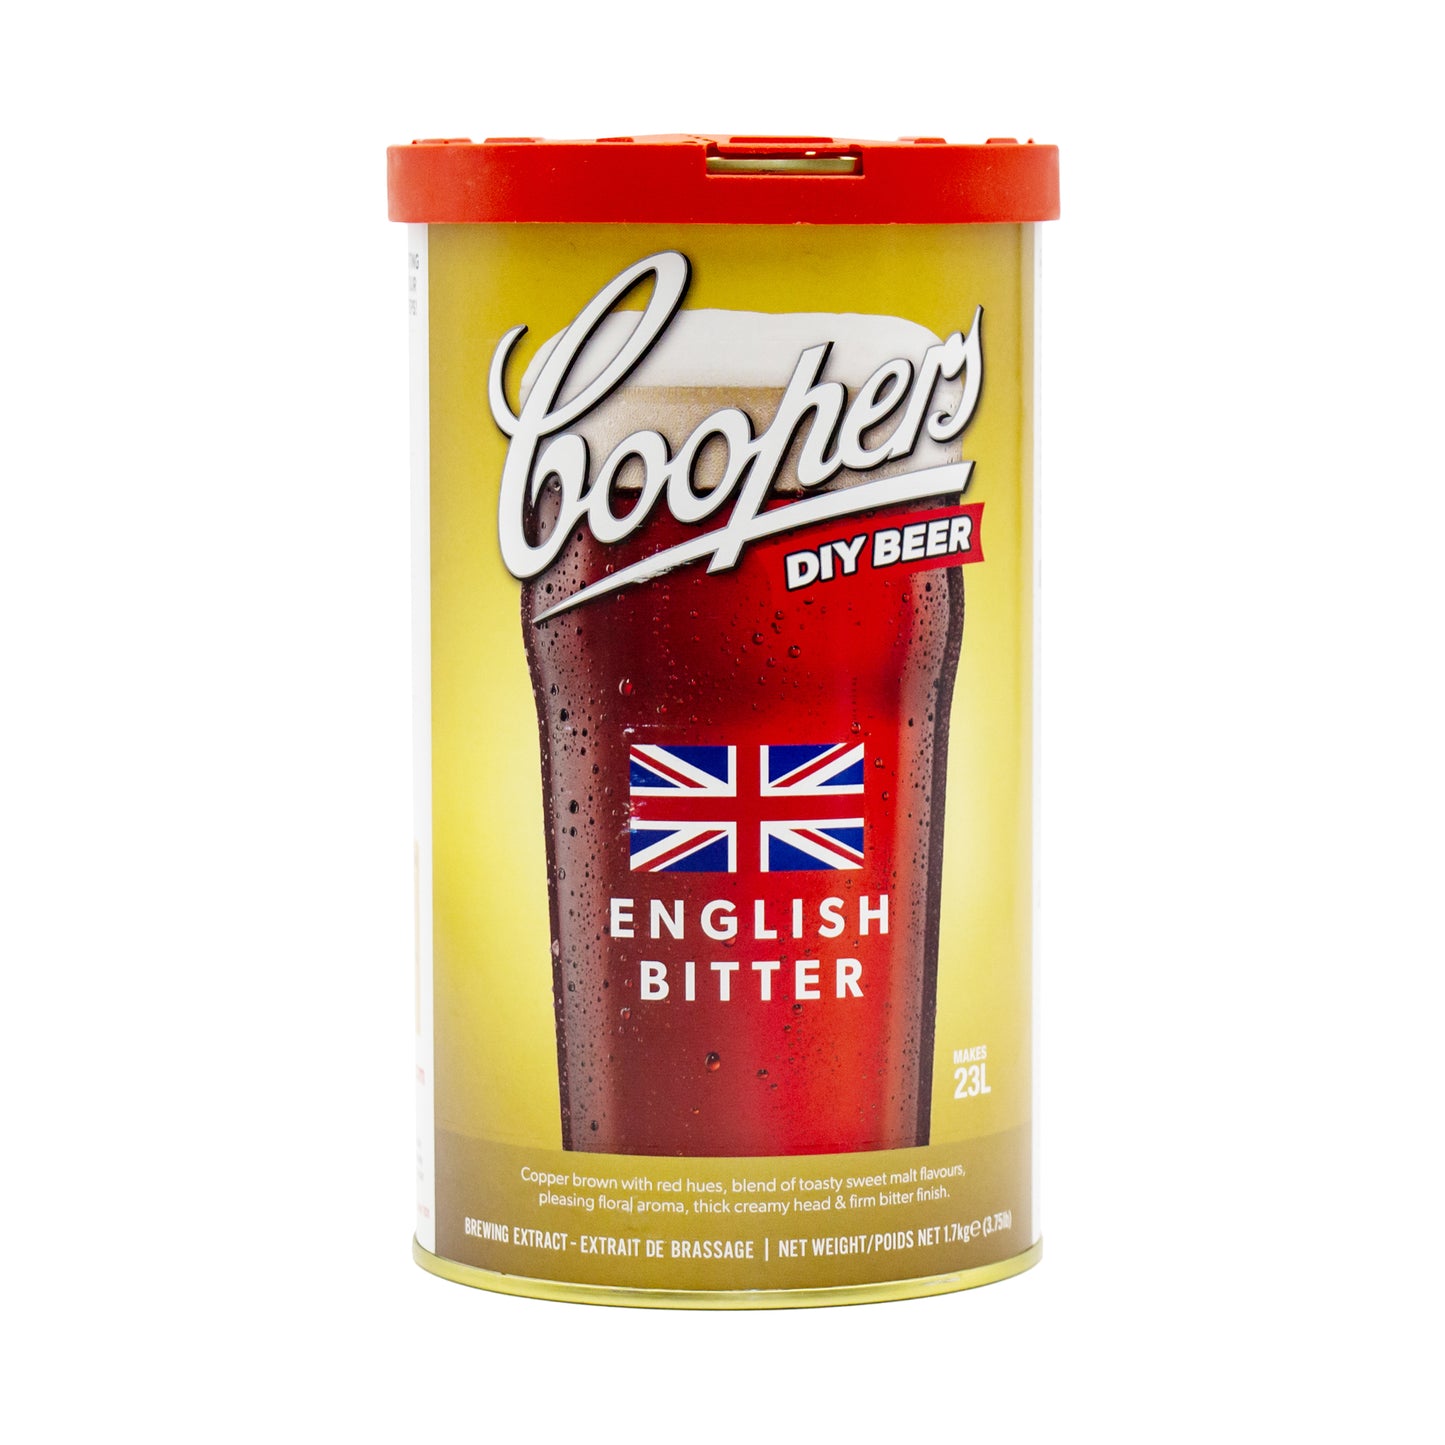 coopers english bitter beer tin